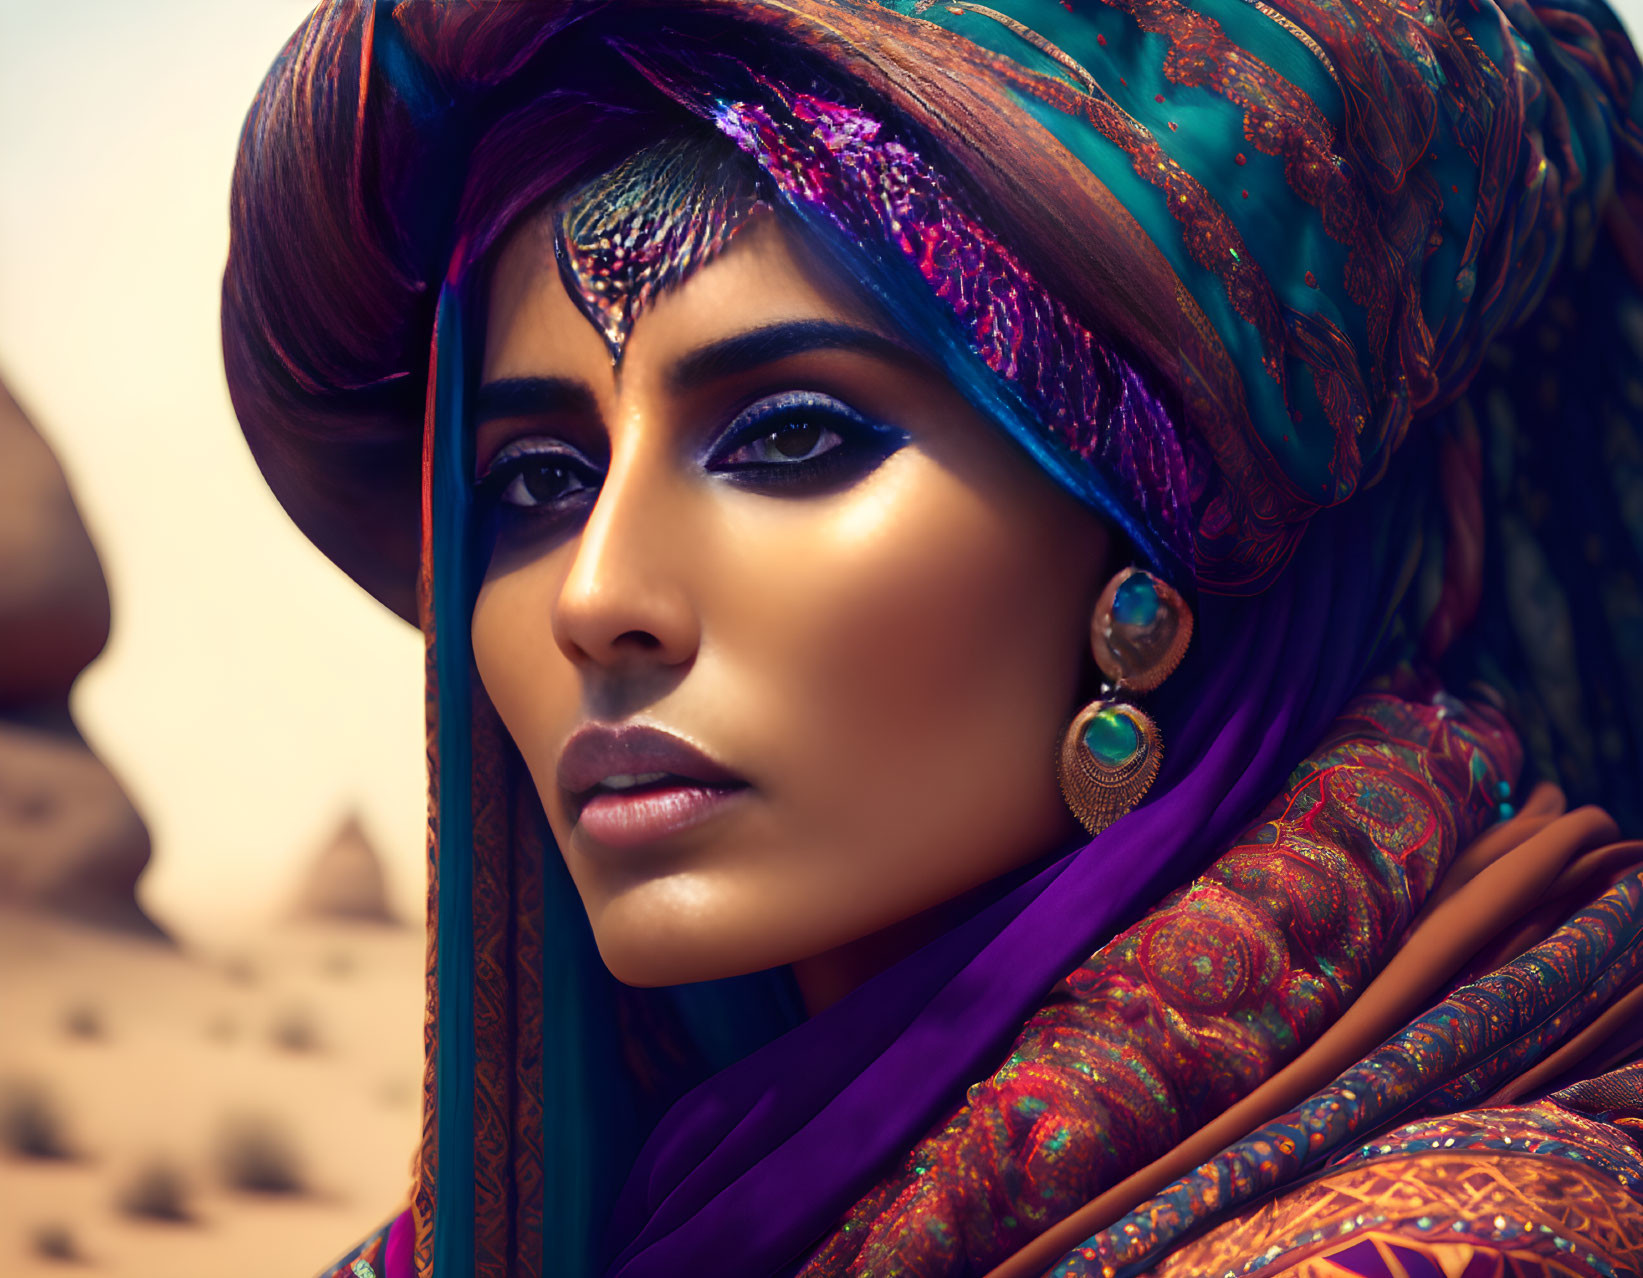 Colorful headscarves woman with striking makeup in desert setting